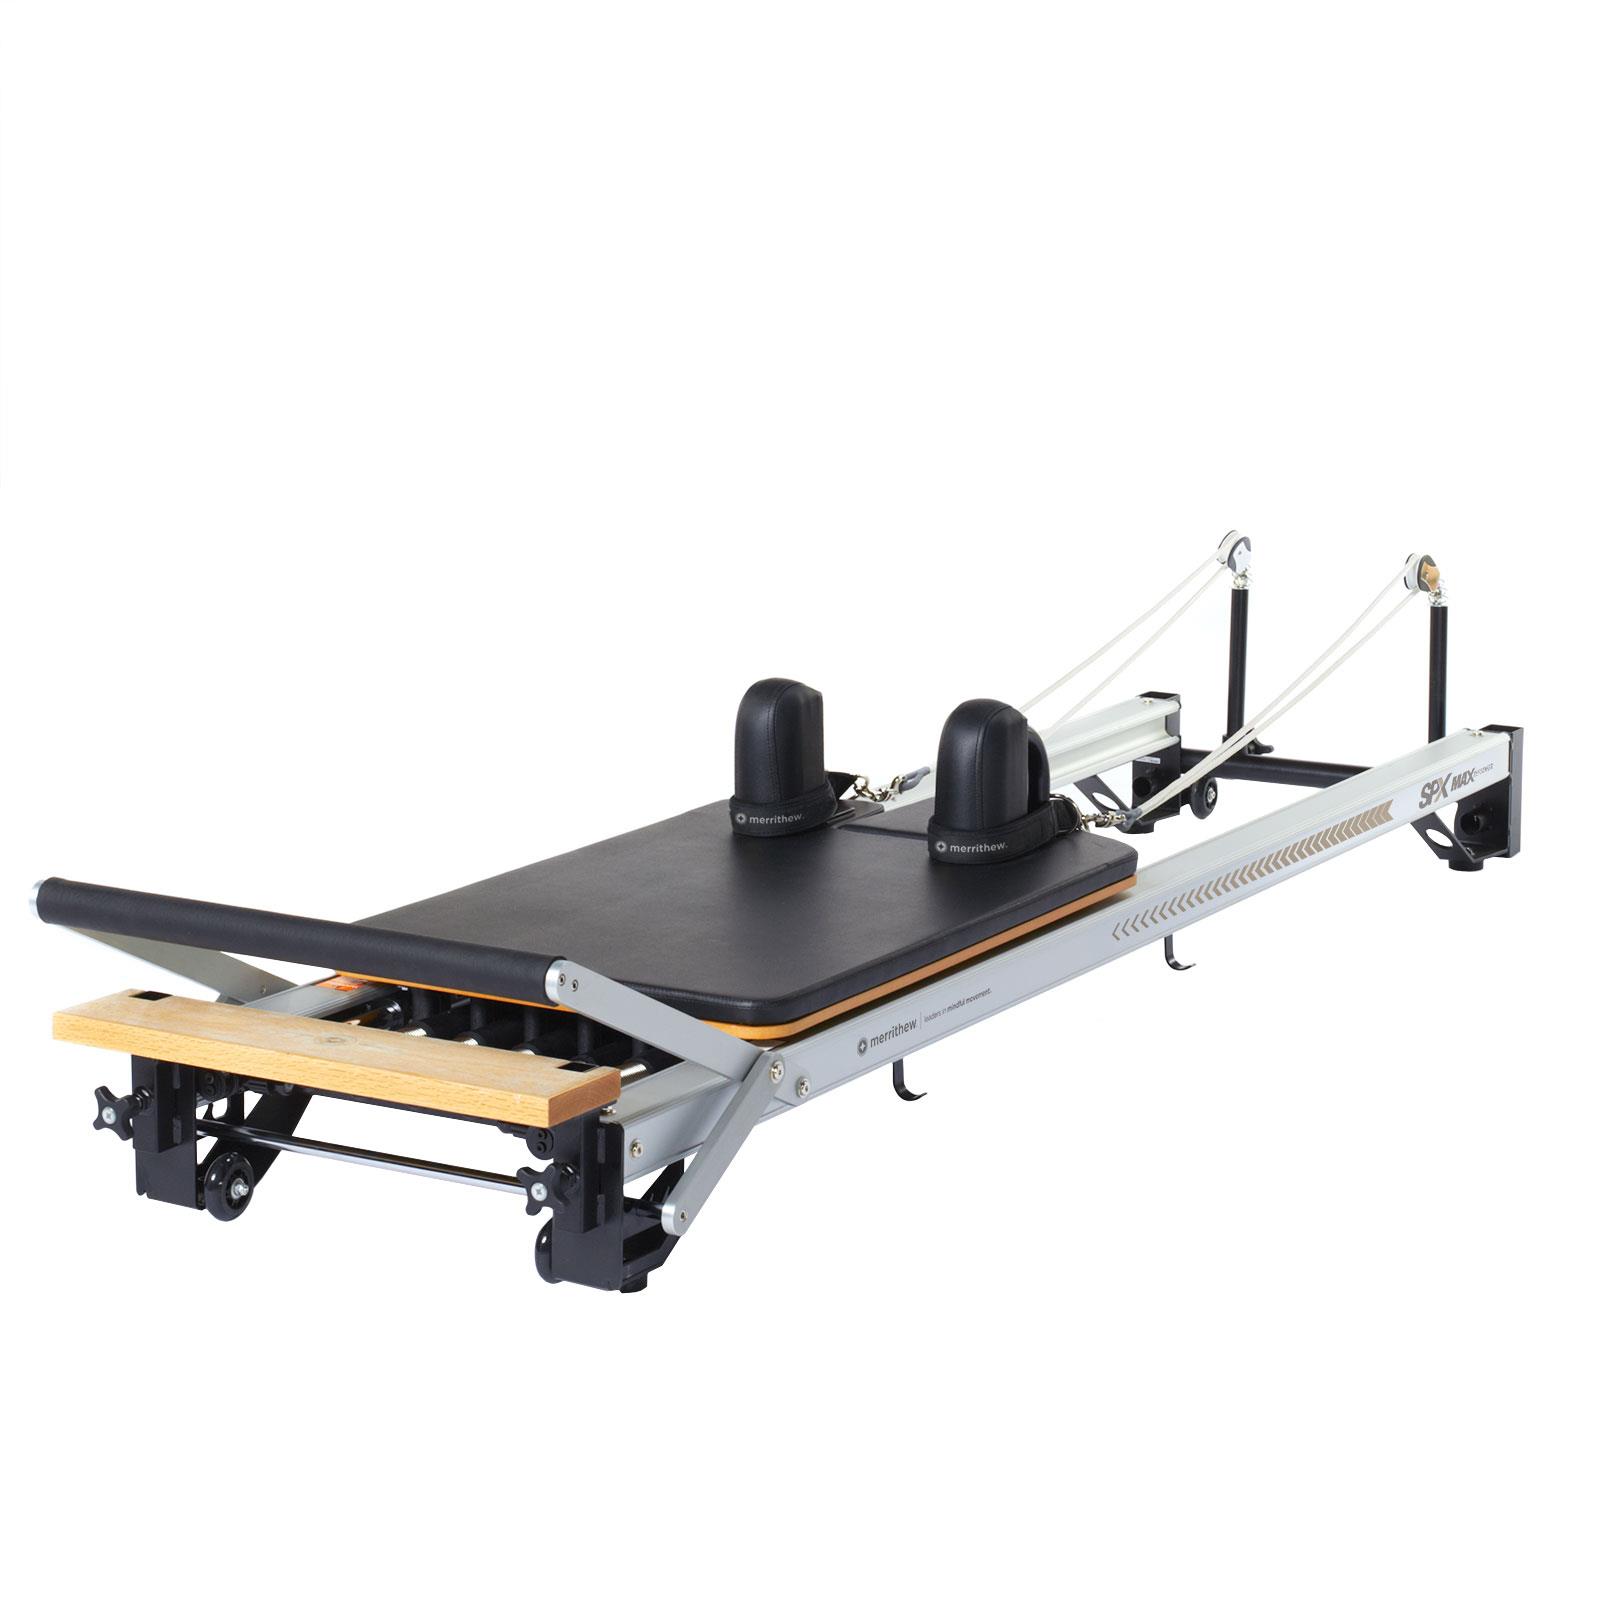 Merrithew SPX Max Reformer on Sale at Gym Marine Yachts and Interiors